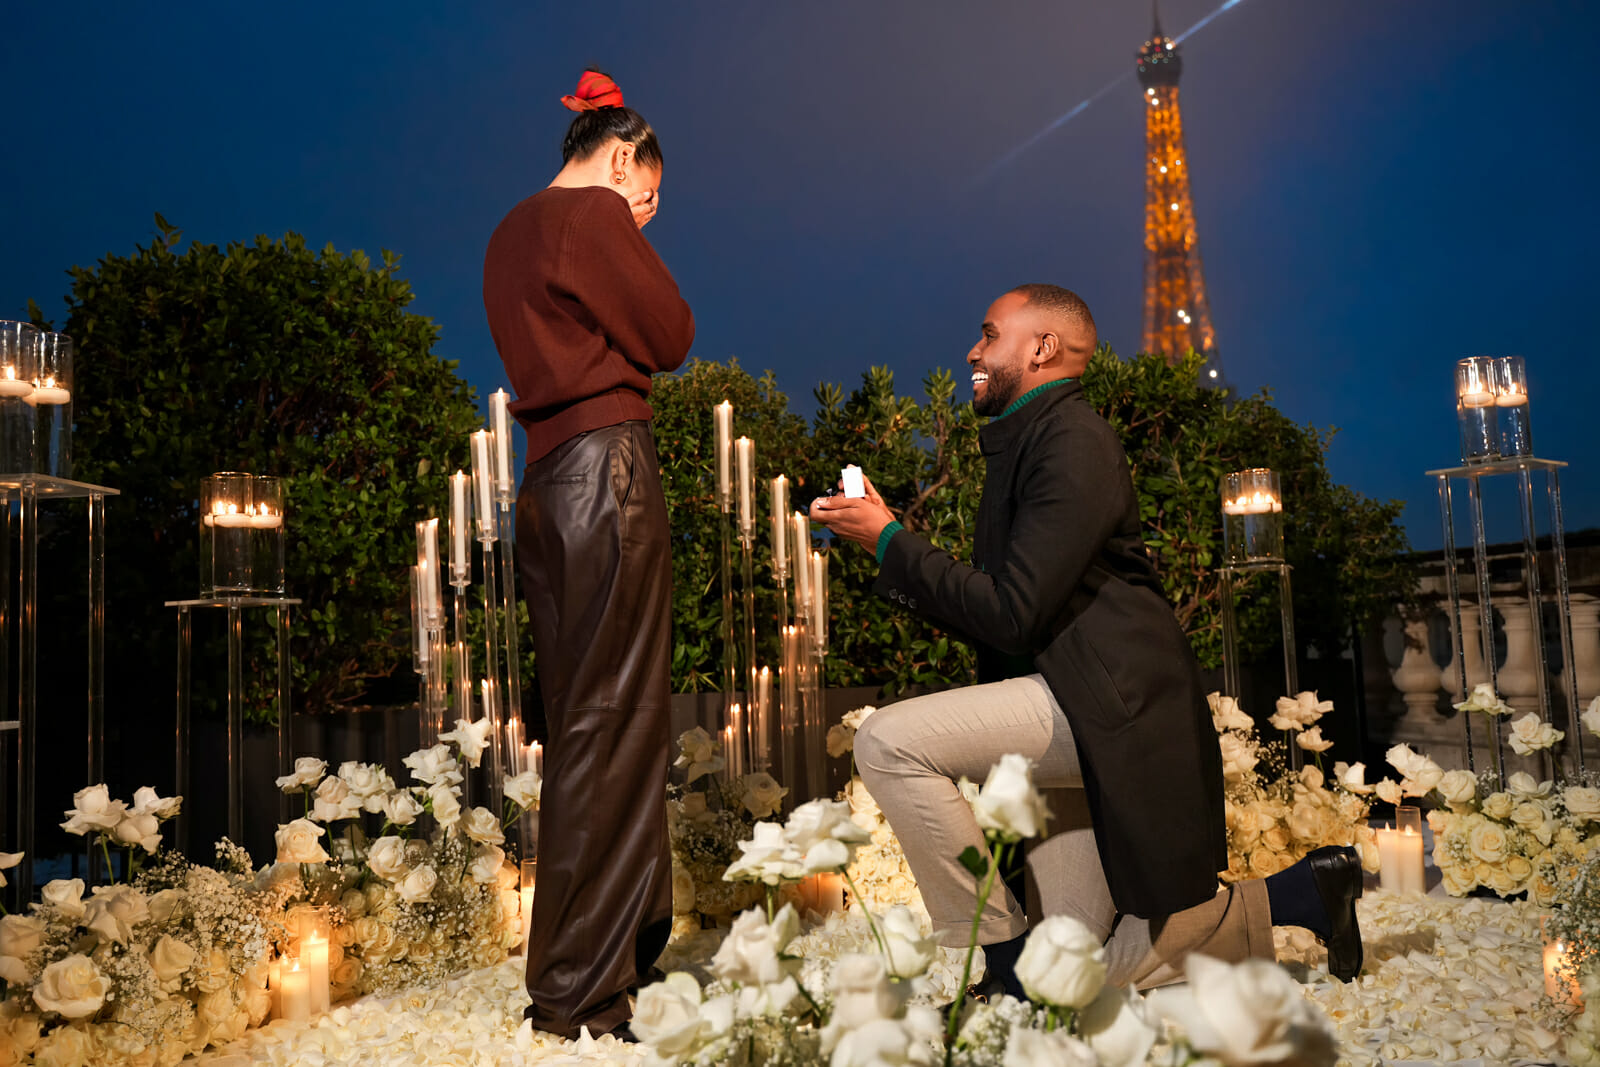 Fairytale Paris proposal with Eiffel Tower view Shangri-La with thousands of white rose petals